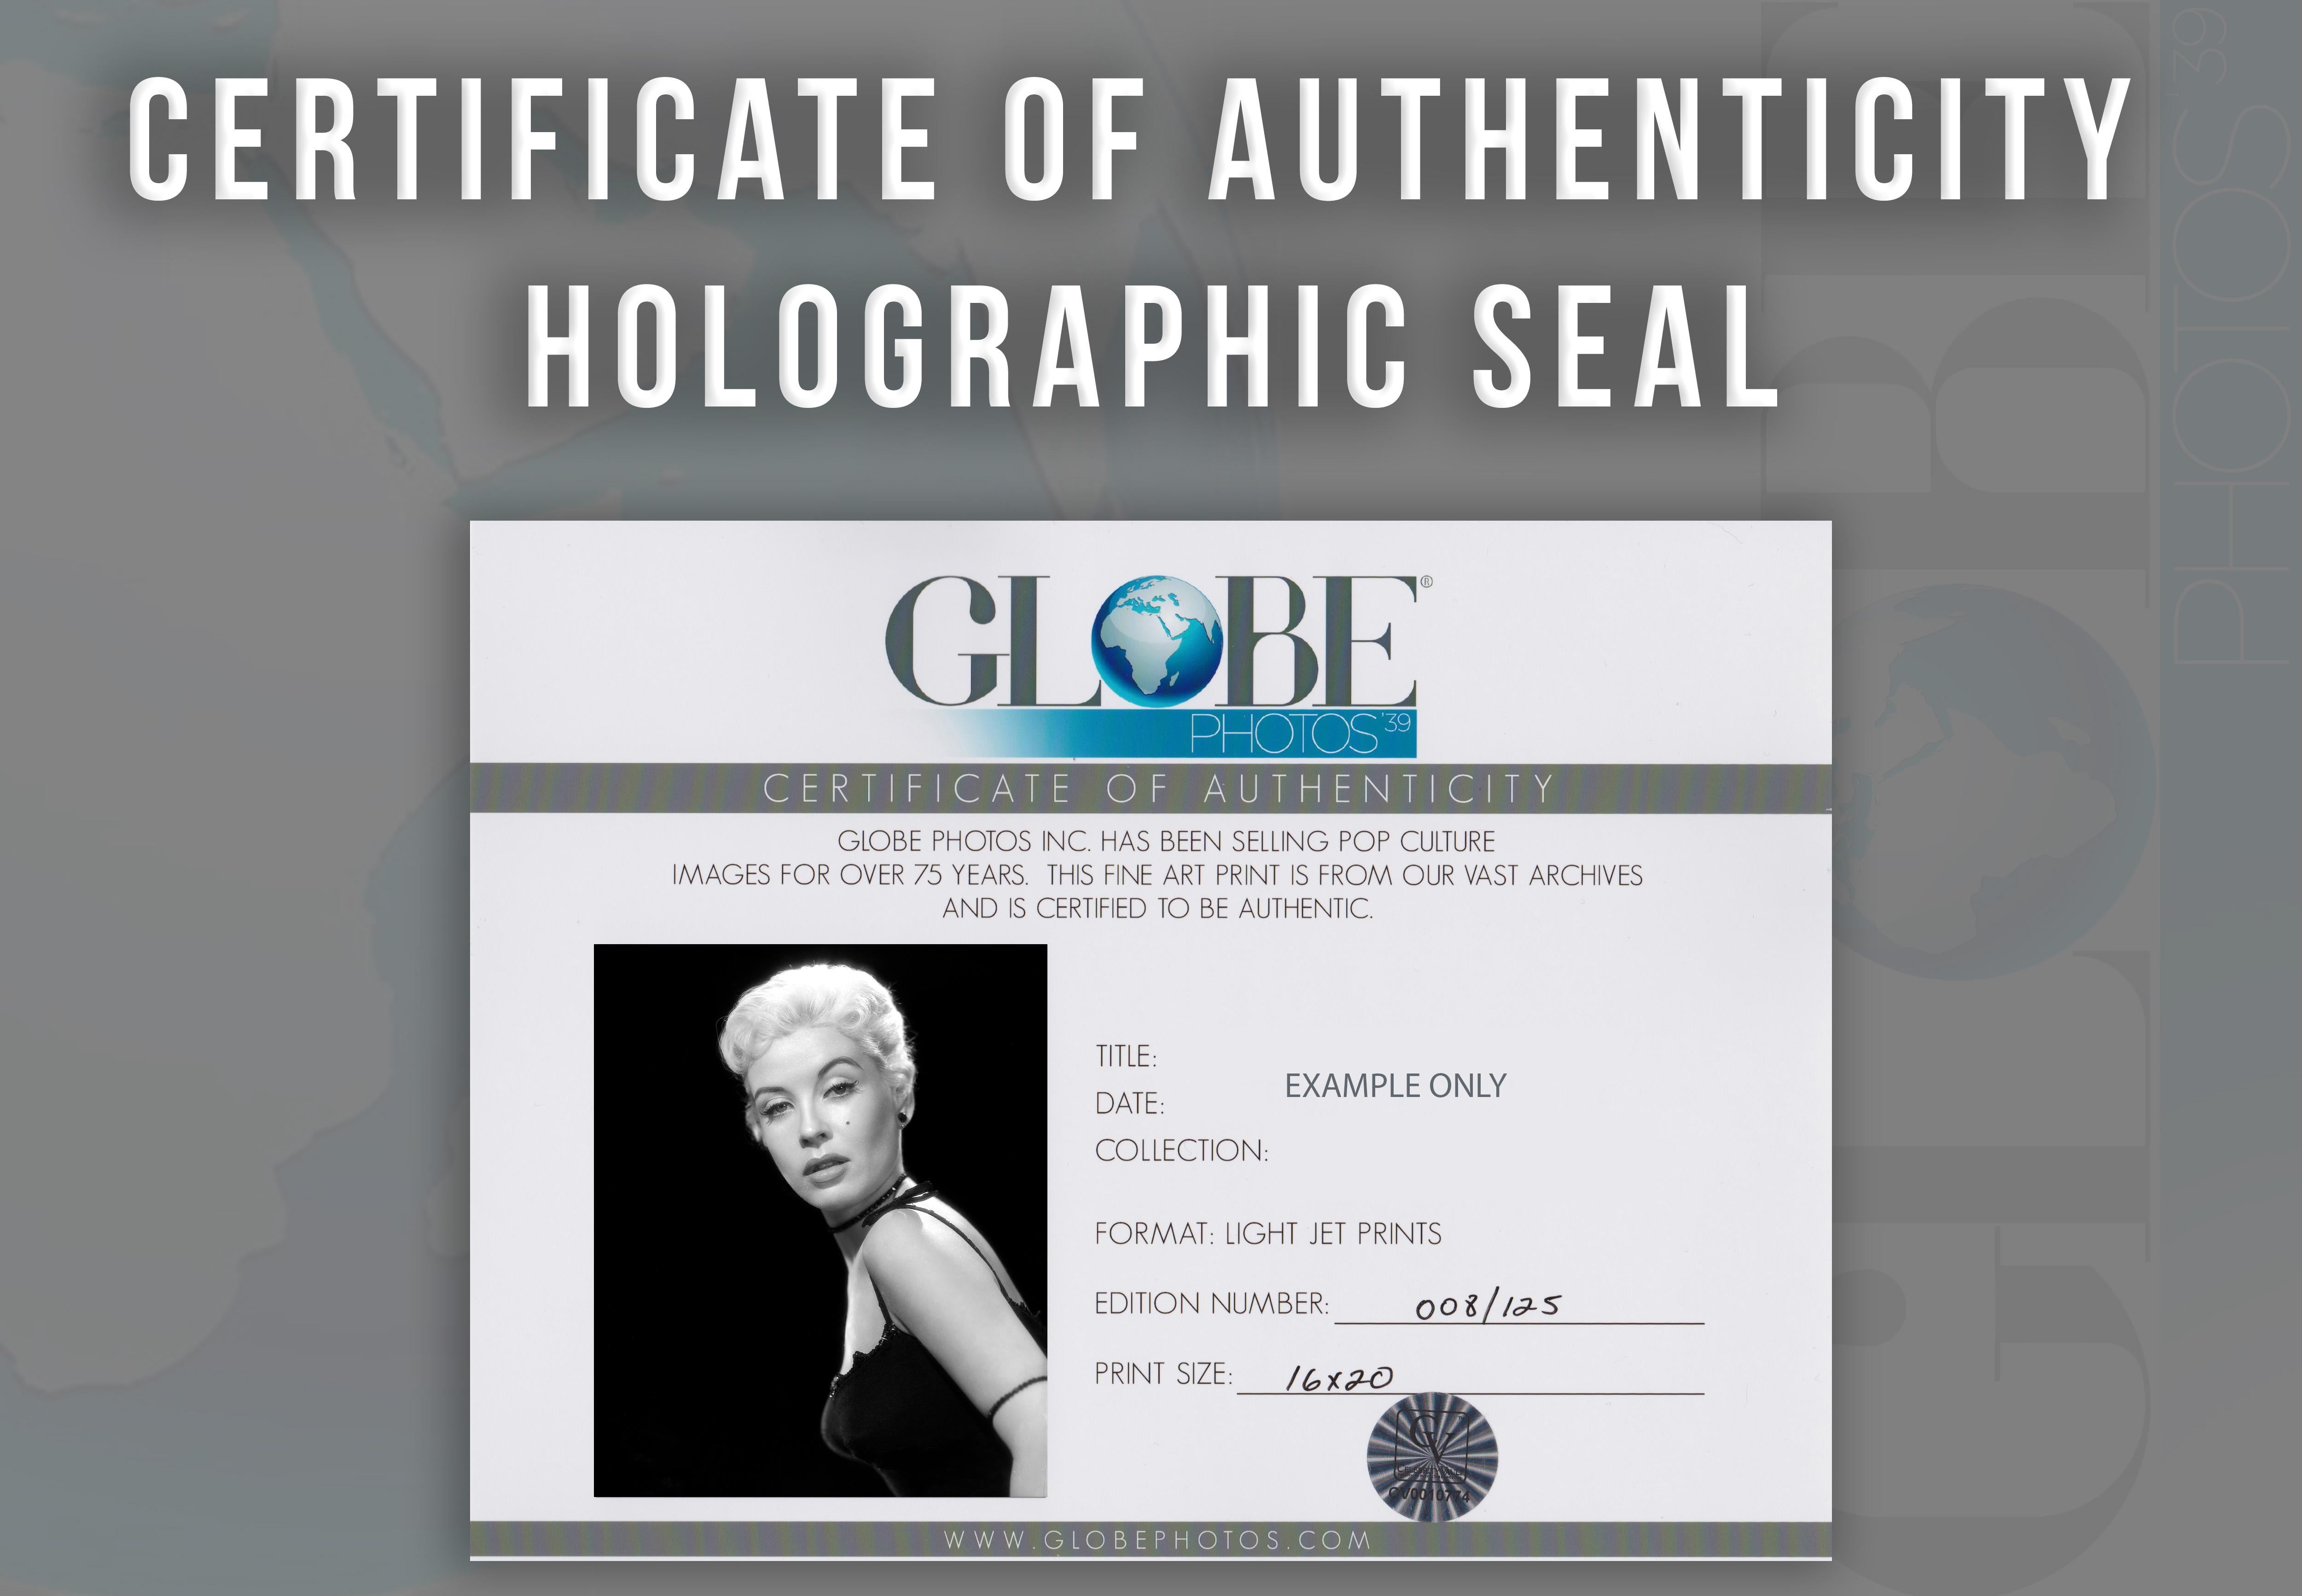 This stunning black and white studio portrait features Gloria Dehaven posed in a mod-style glamour portrait. Gloria DaHaven was an American actress and singer who was a contract star for Metro-Goldwyn-Mayer.

This image is credited to Globe